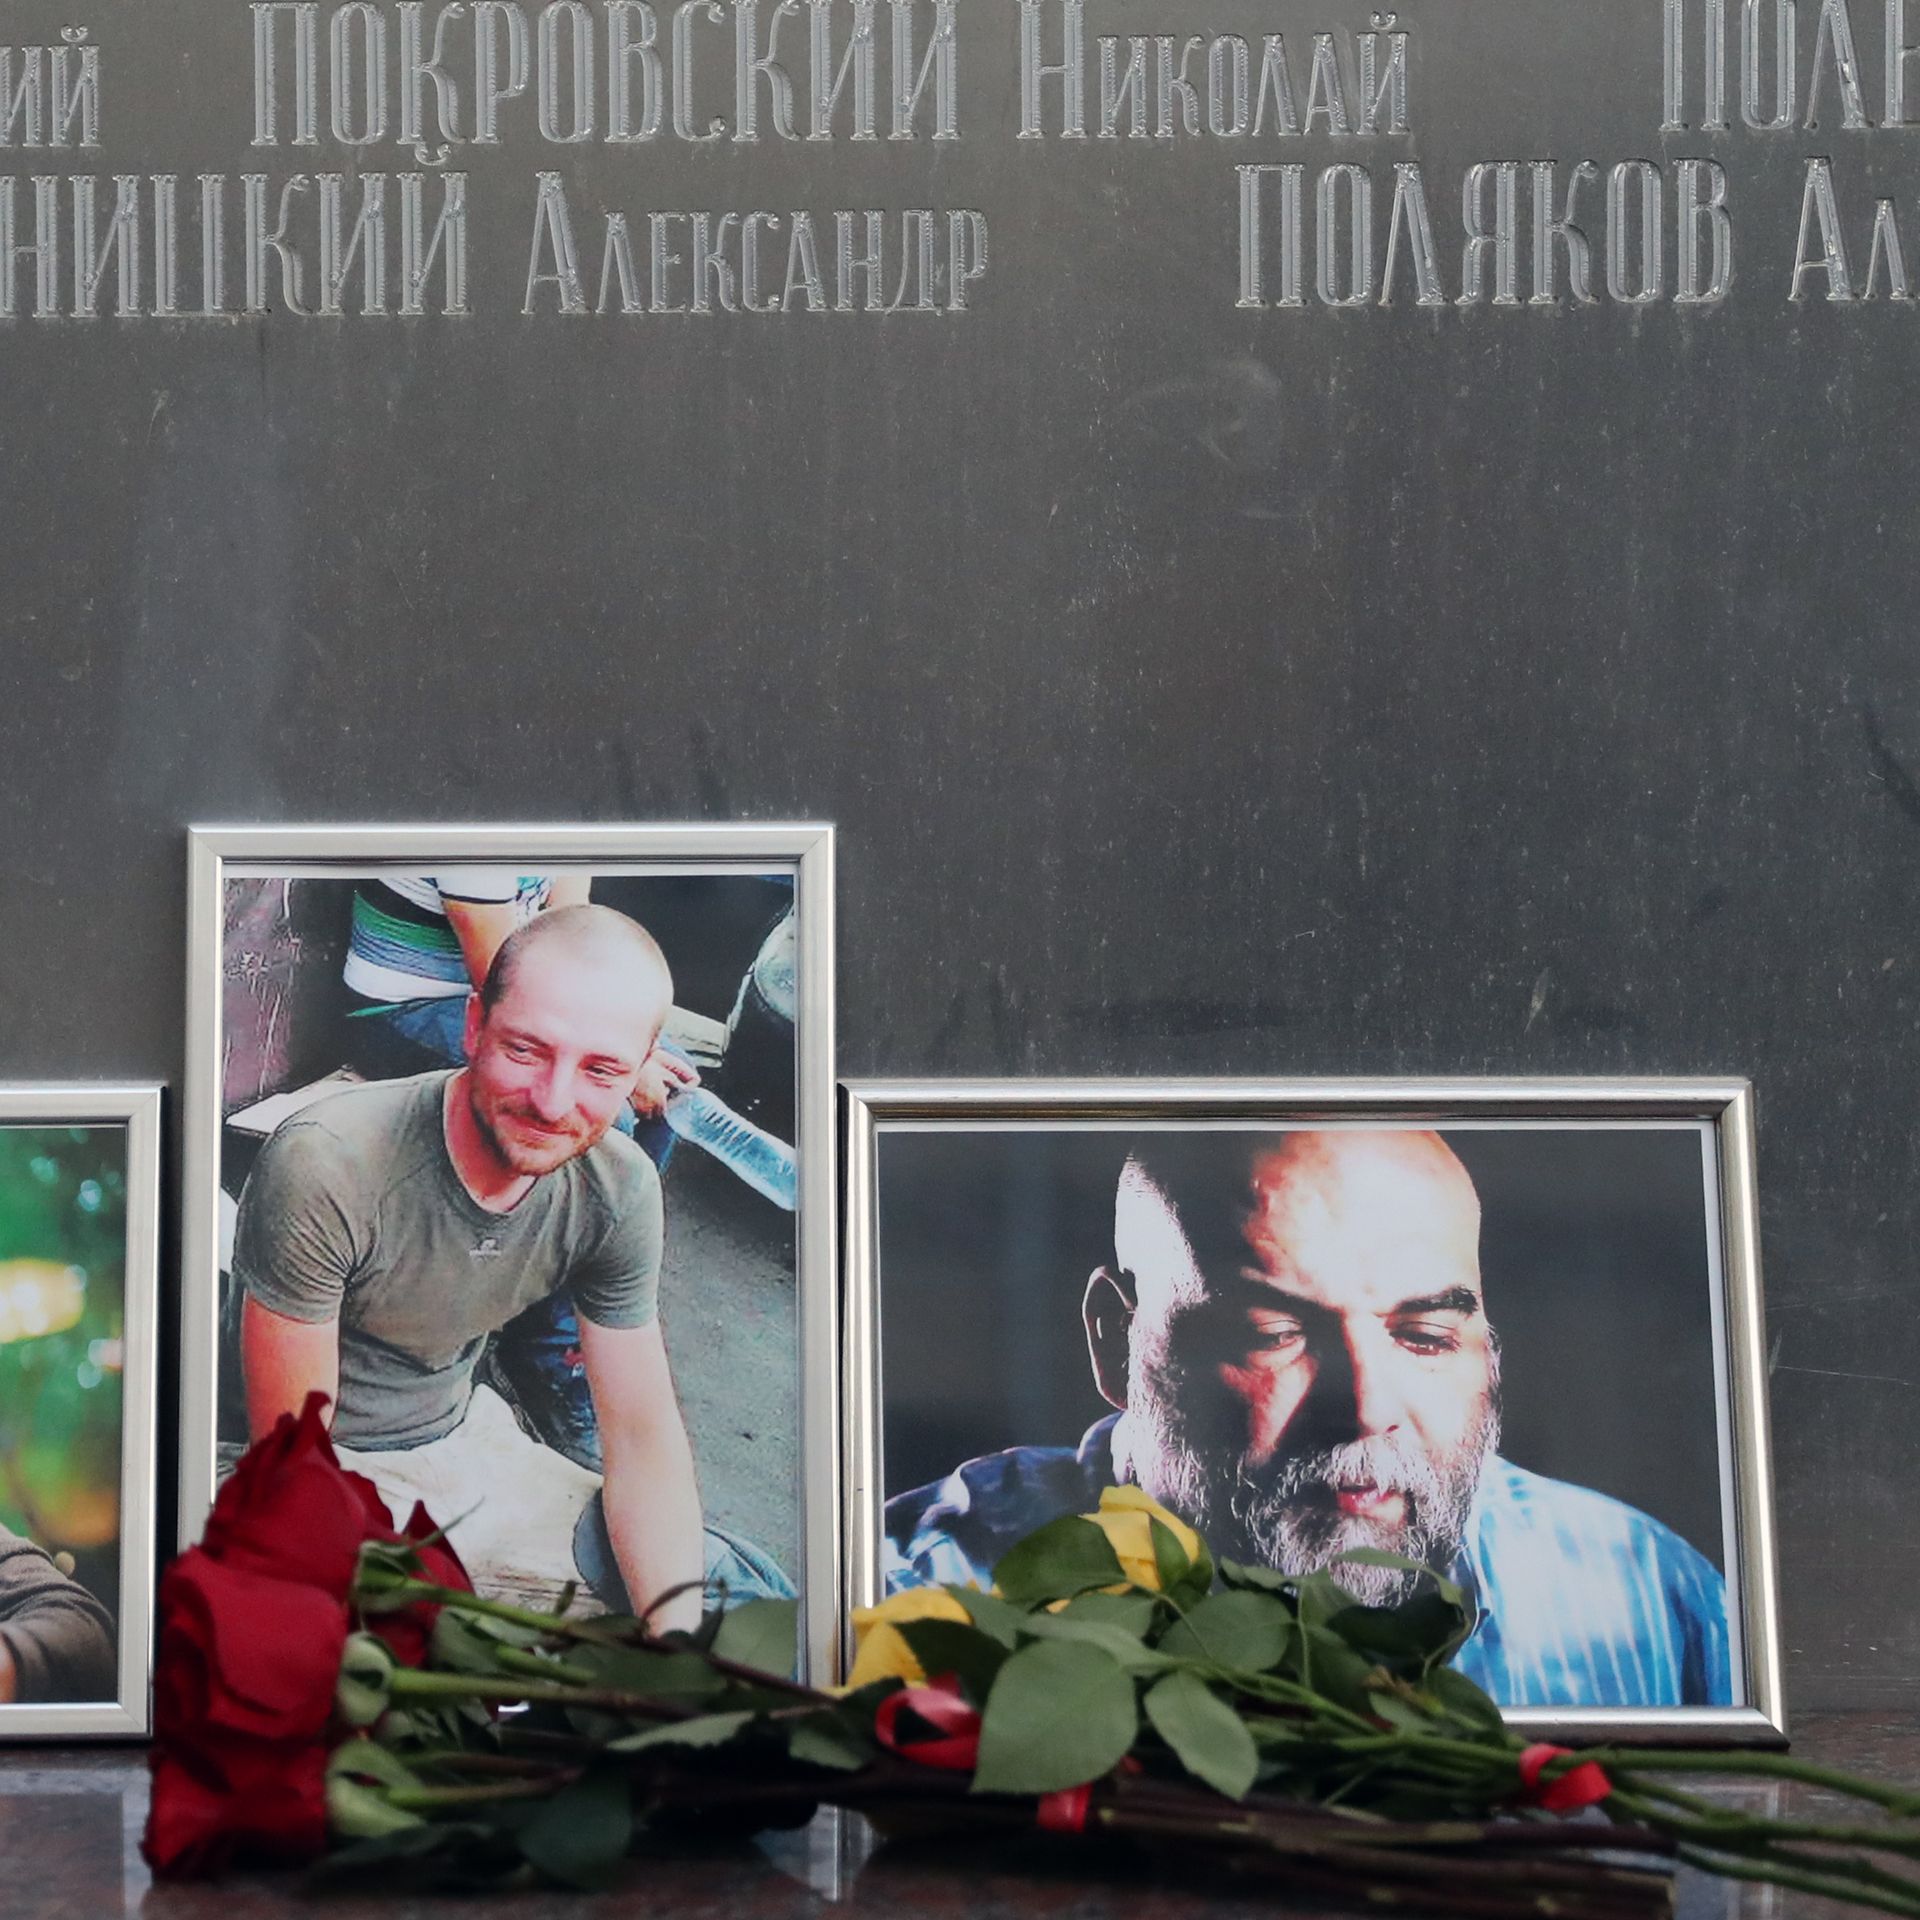 Flowers brought to the Central House of Journalists in memory of three Russian journalists killed in the Central African Republic.